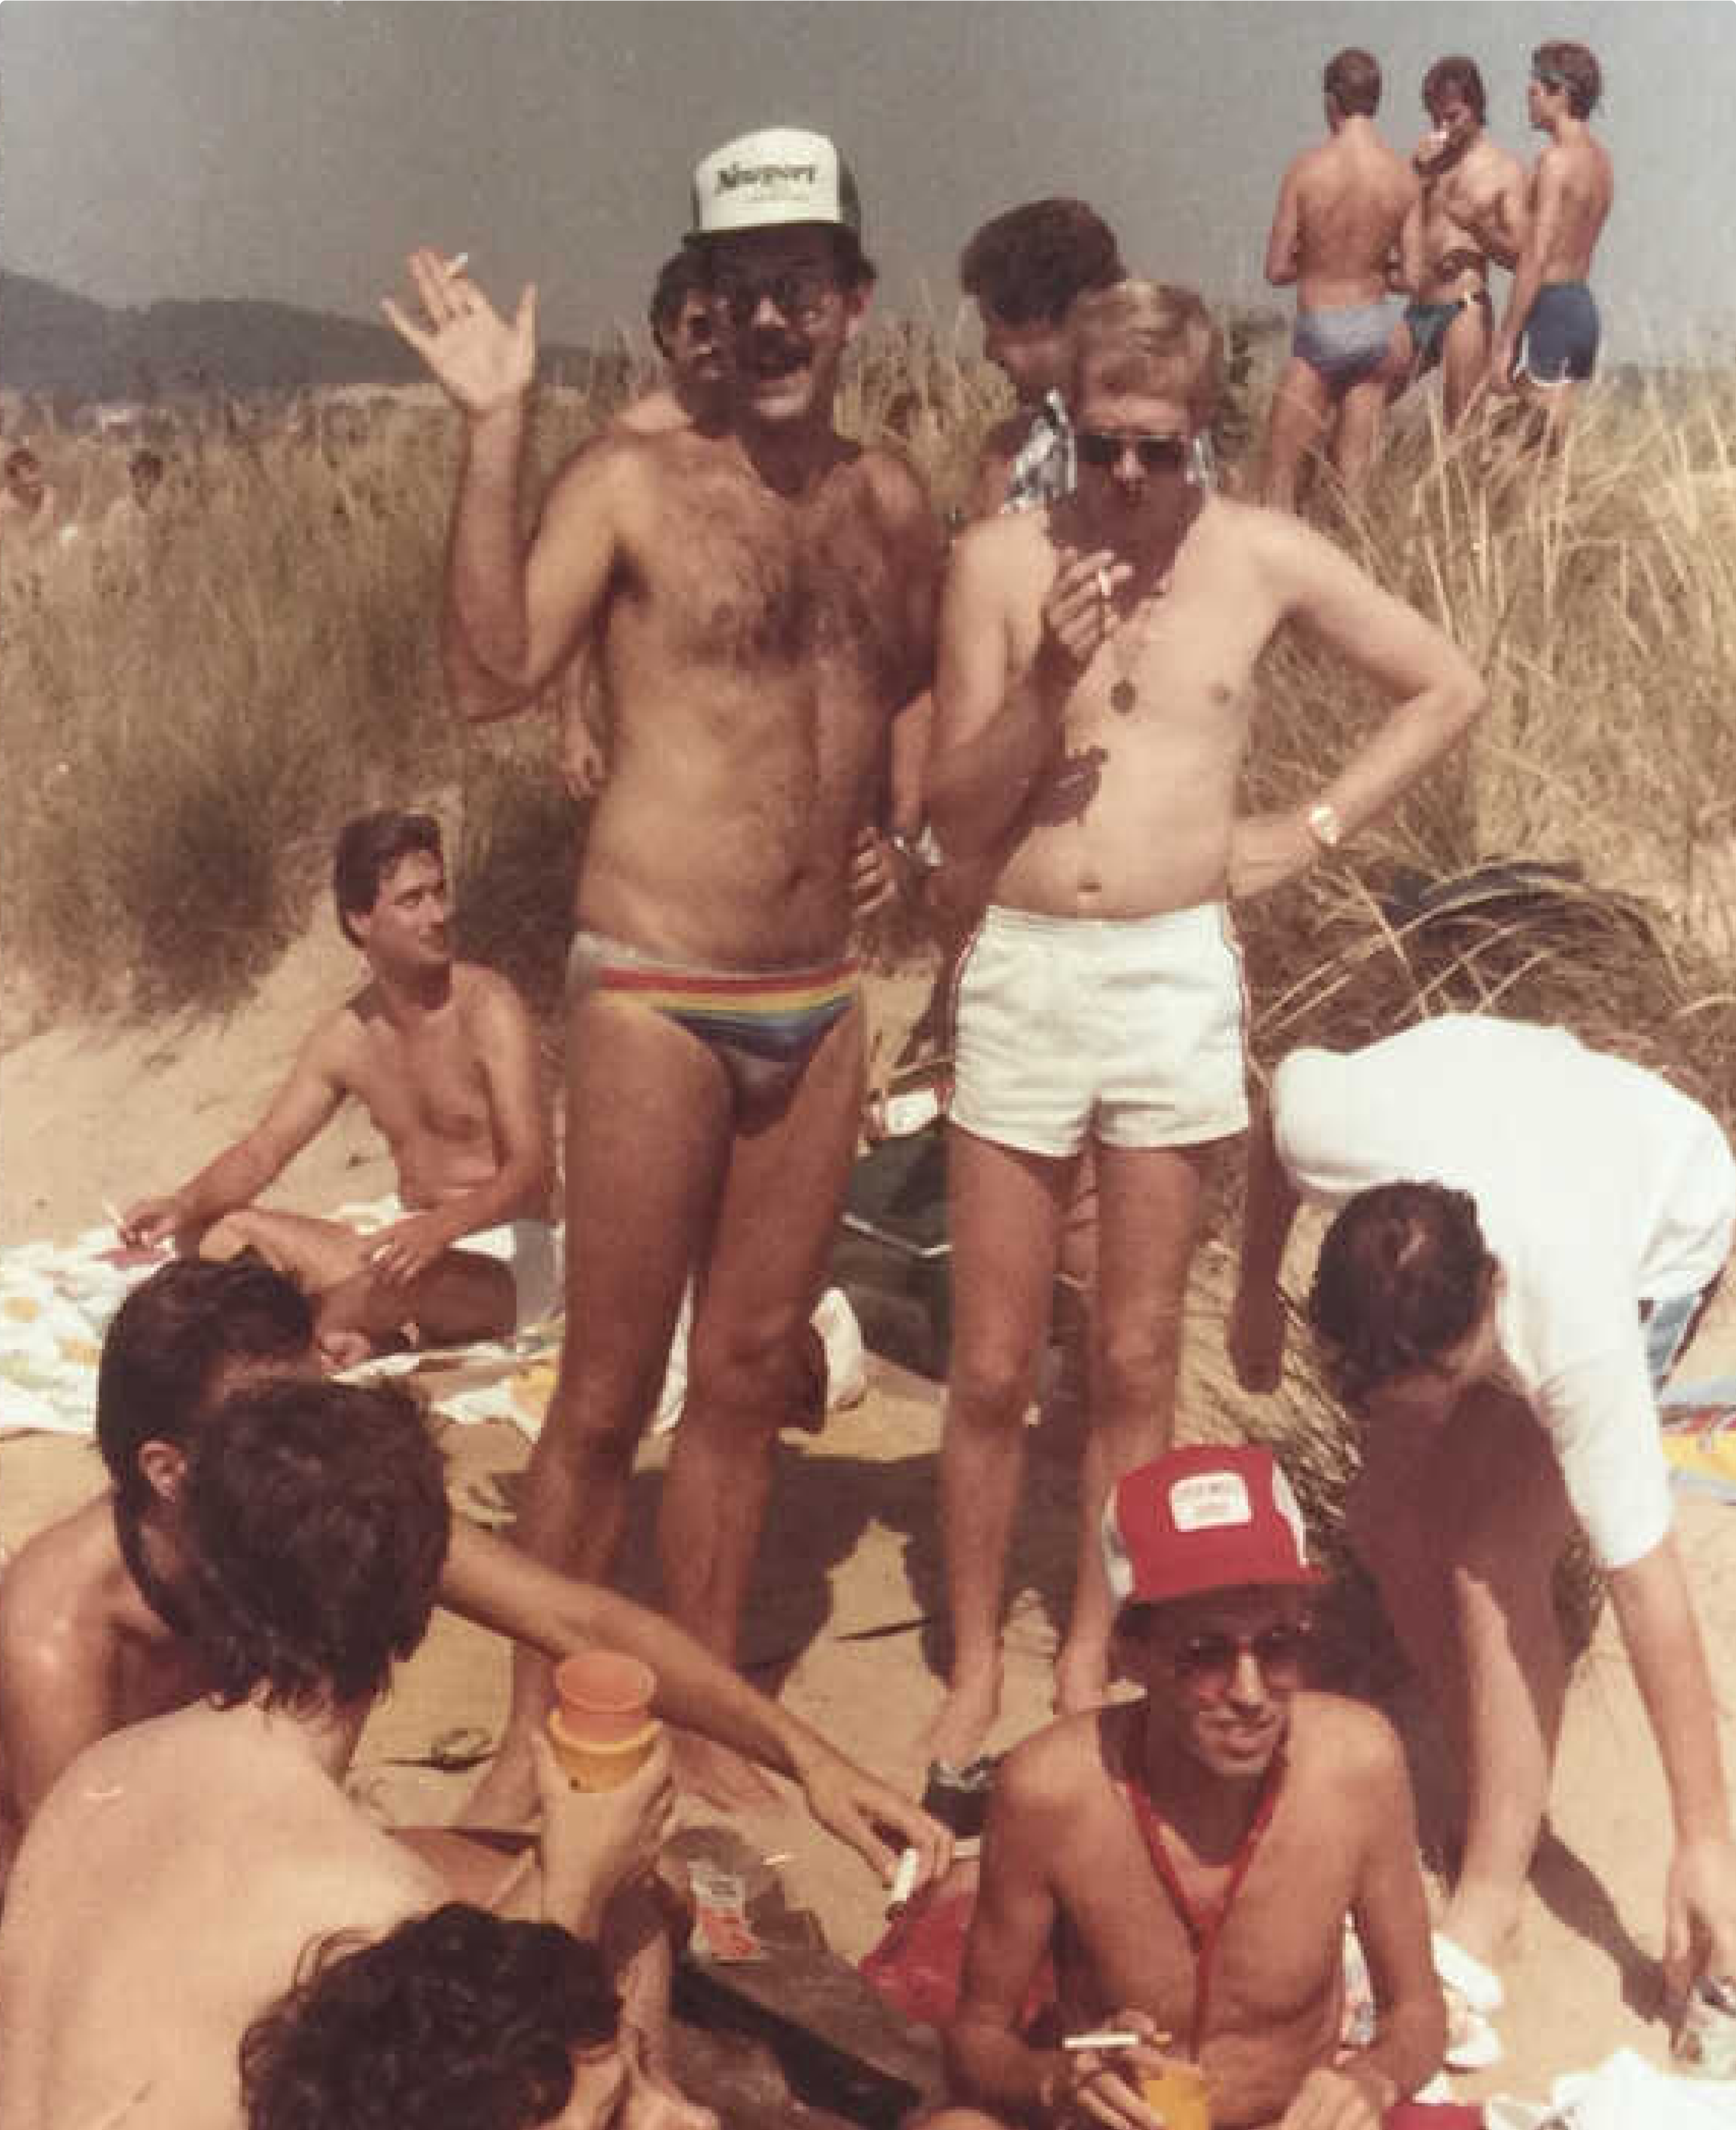 A historic image of men on a beach.